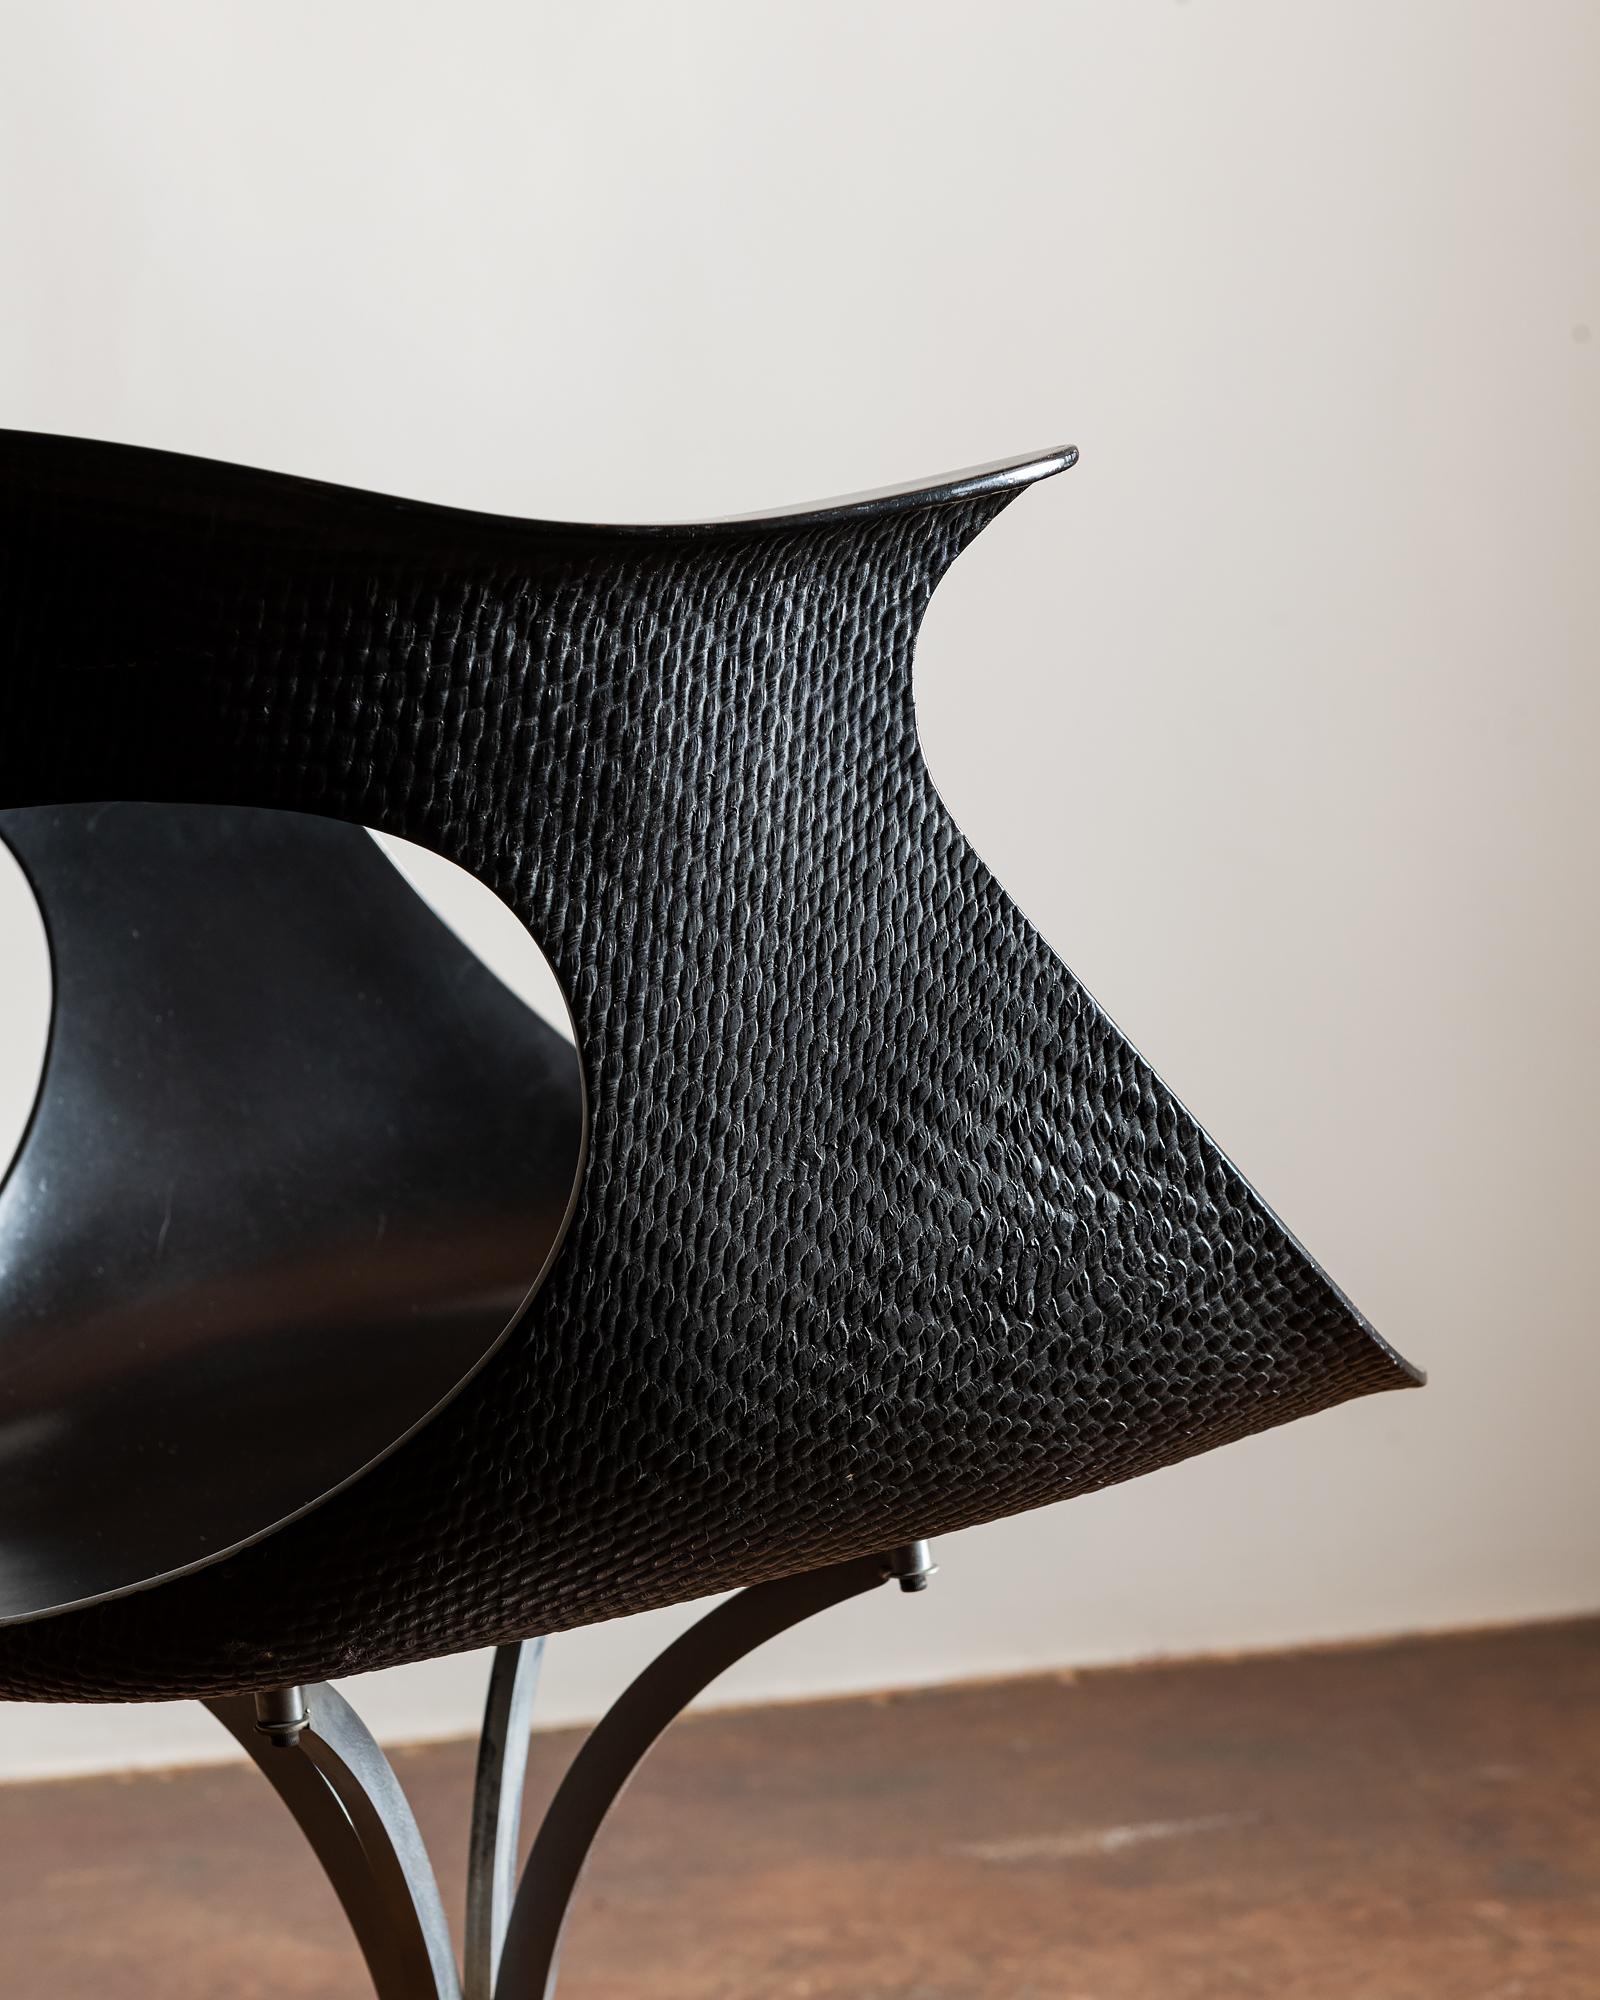 Estelle and Erwine Laverne Lotus Chair in Black, United States, 1960s 1